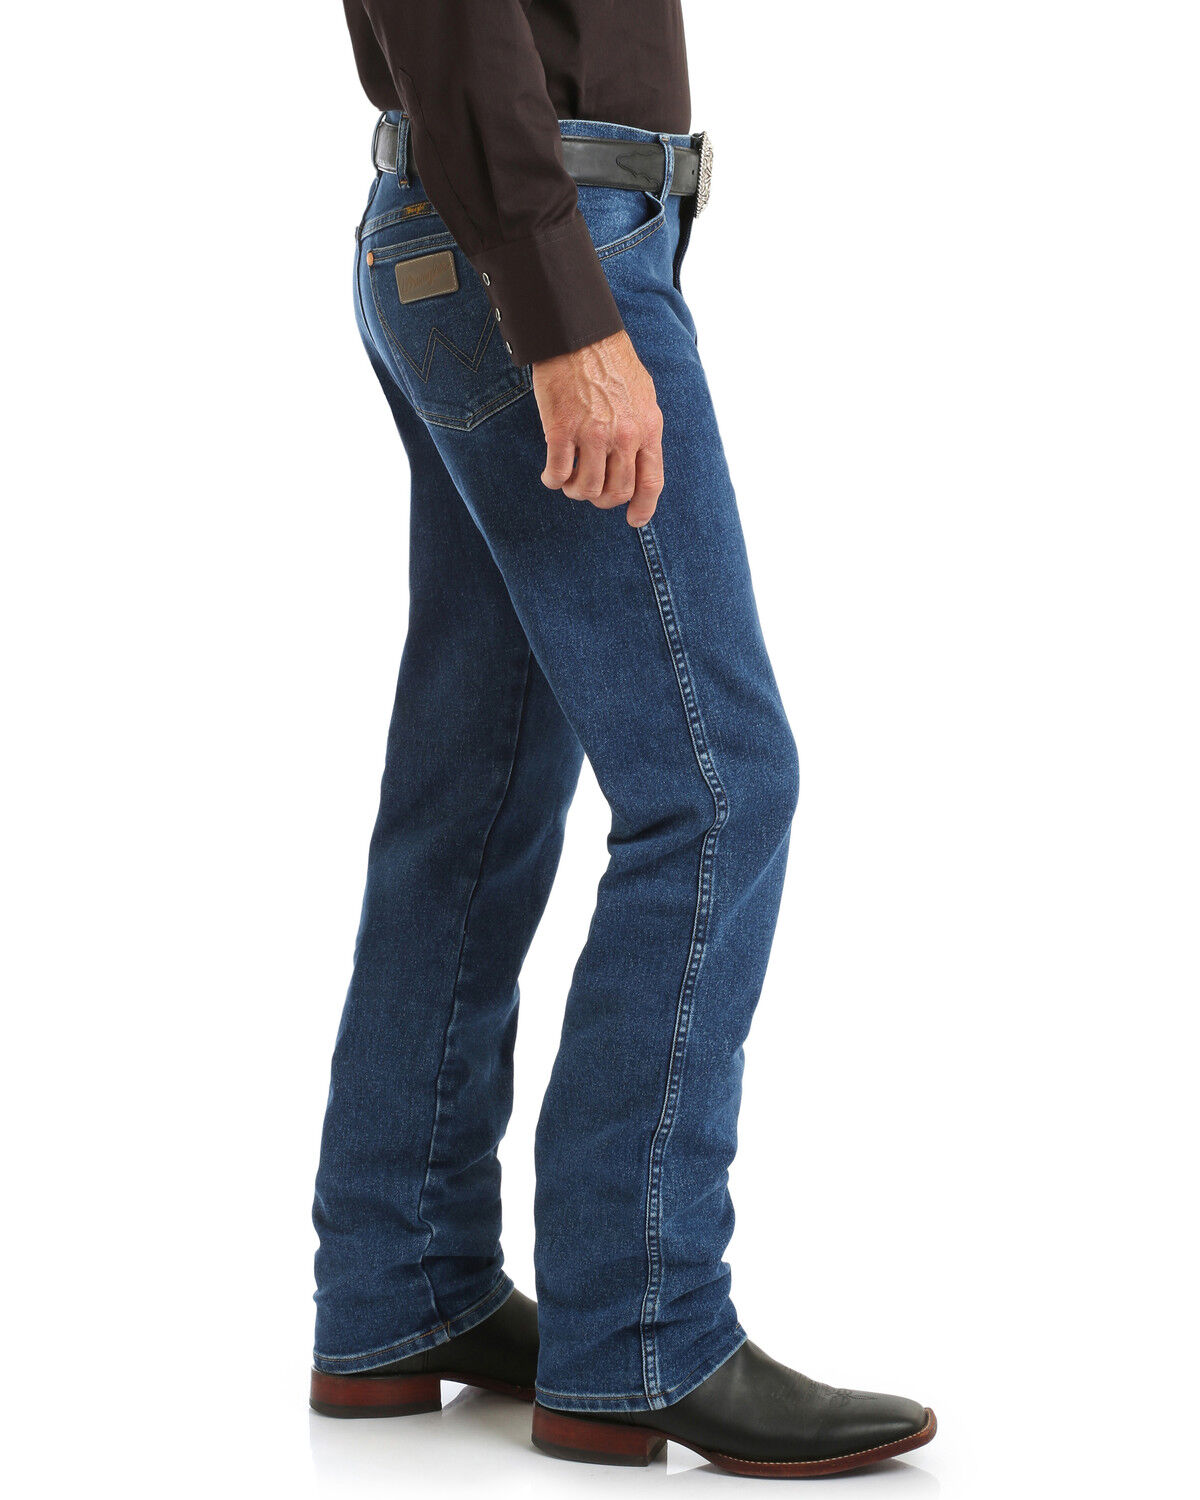 bootcut jeans with boots